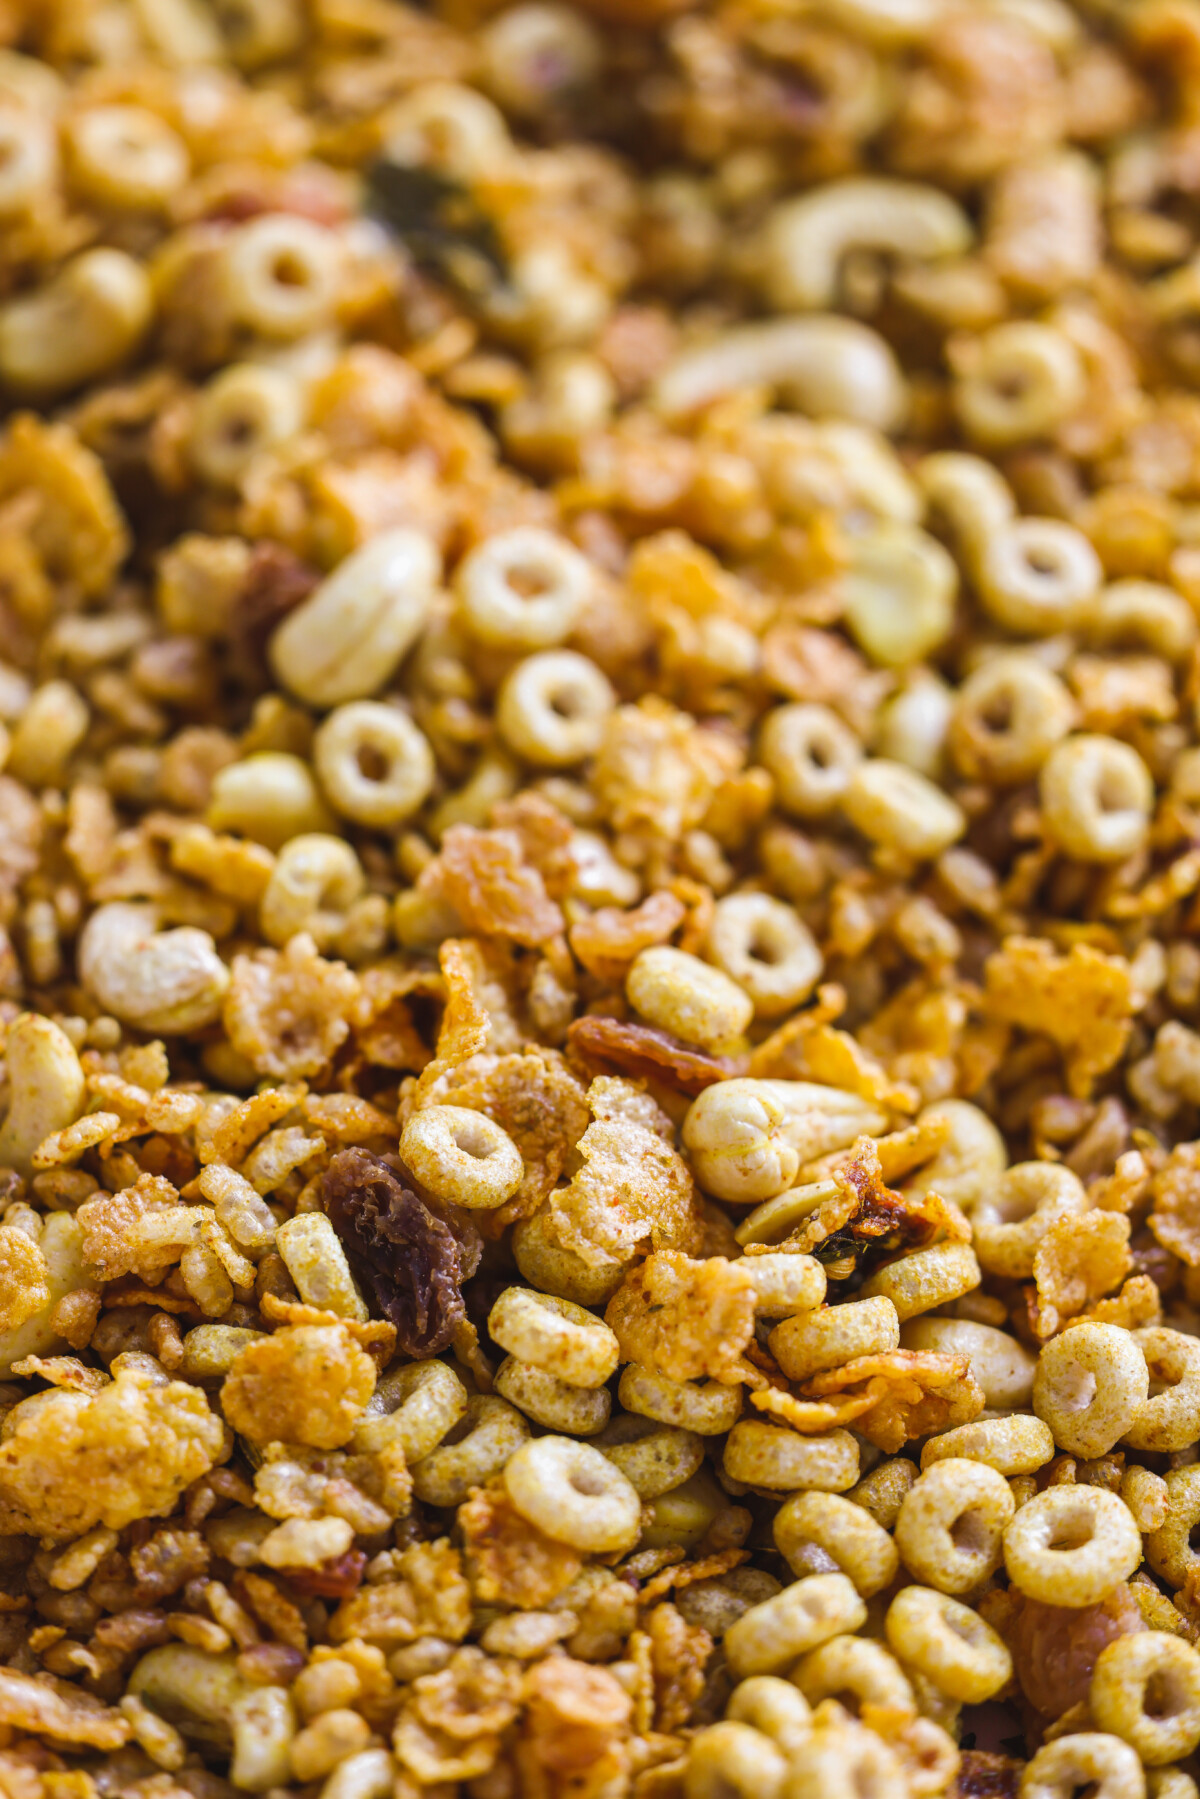 a closeup photo showing the contents of this chivda snack mix